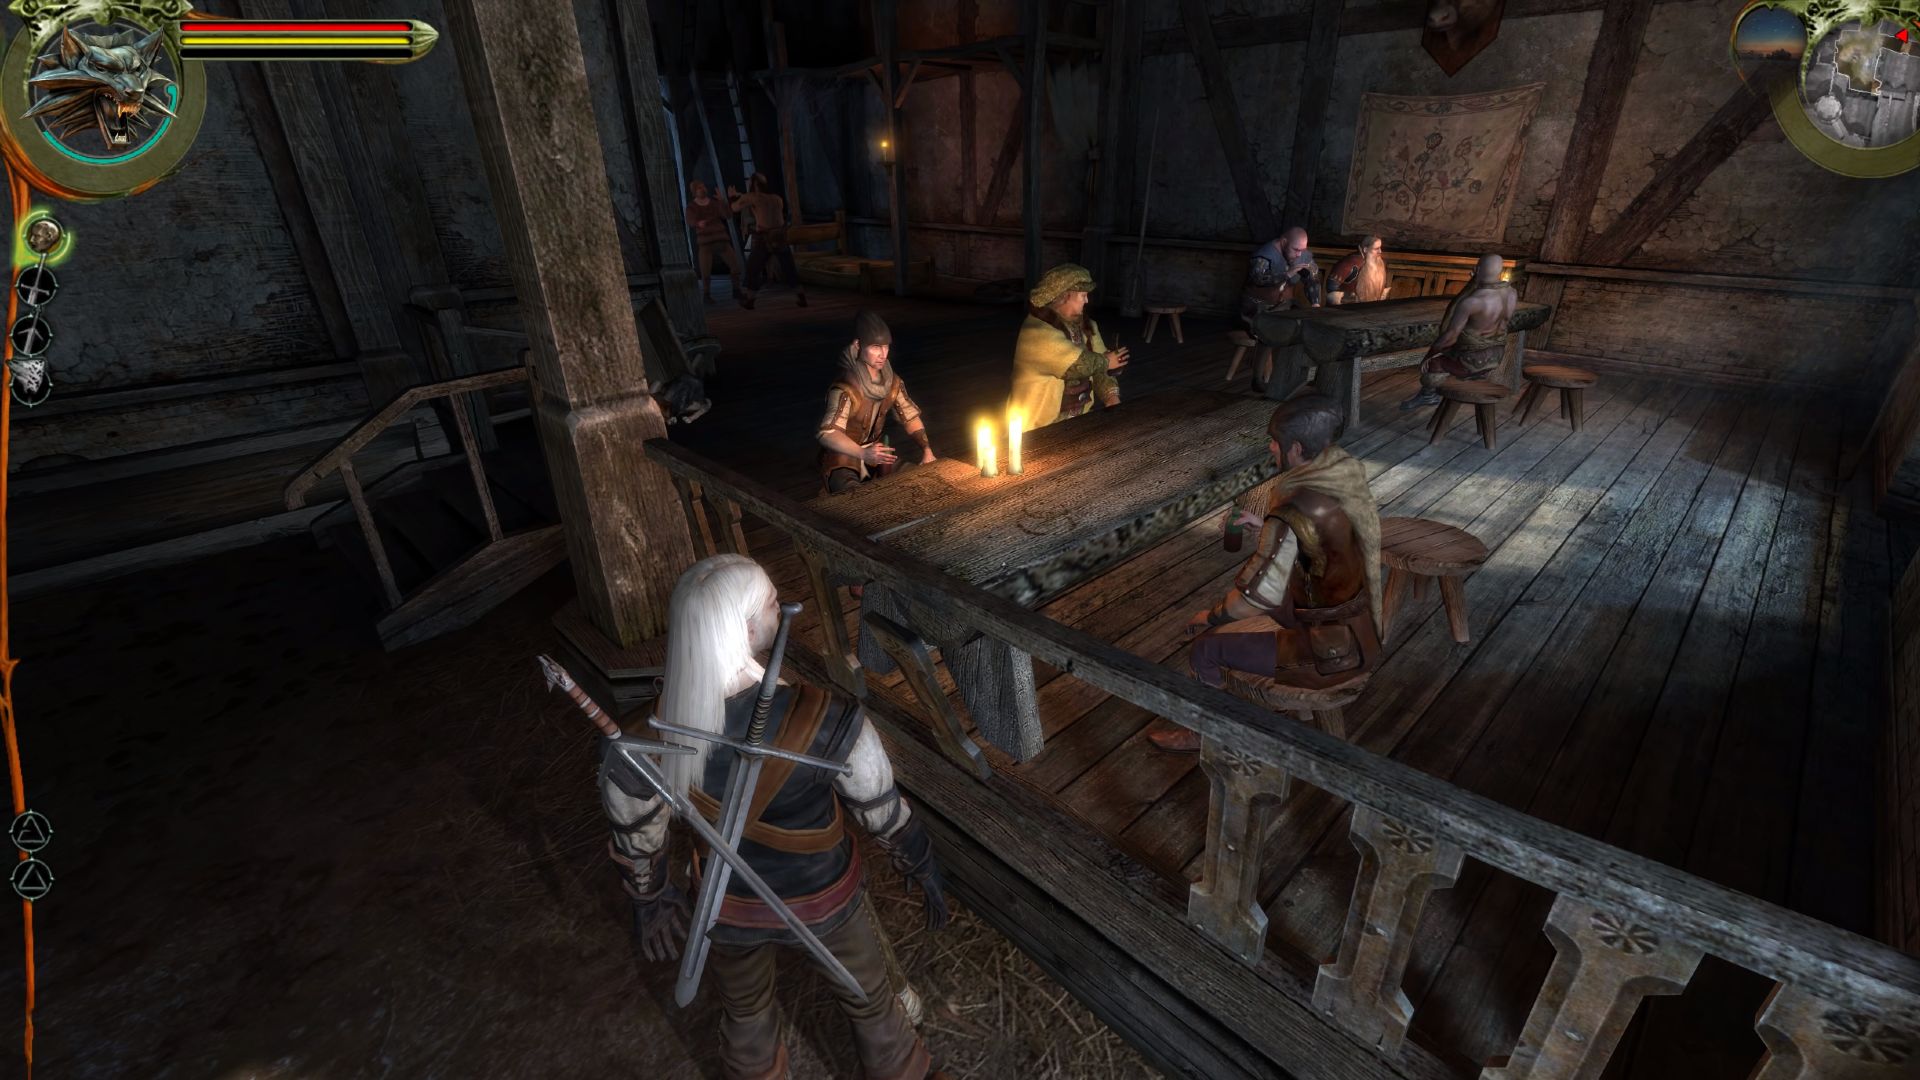 For 2007 The Witcher 1 looks amazing. And i think this game is